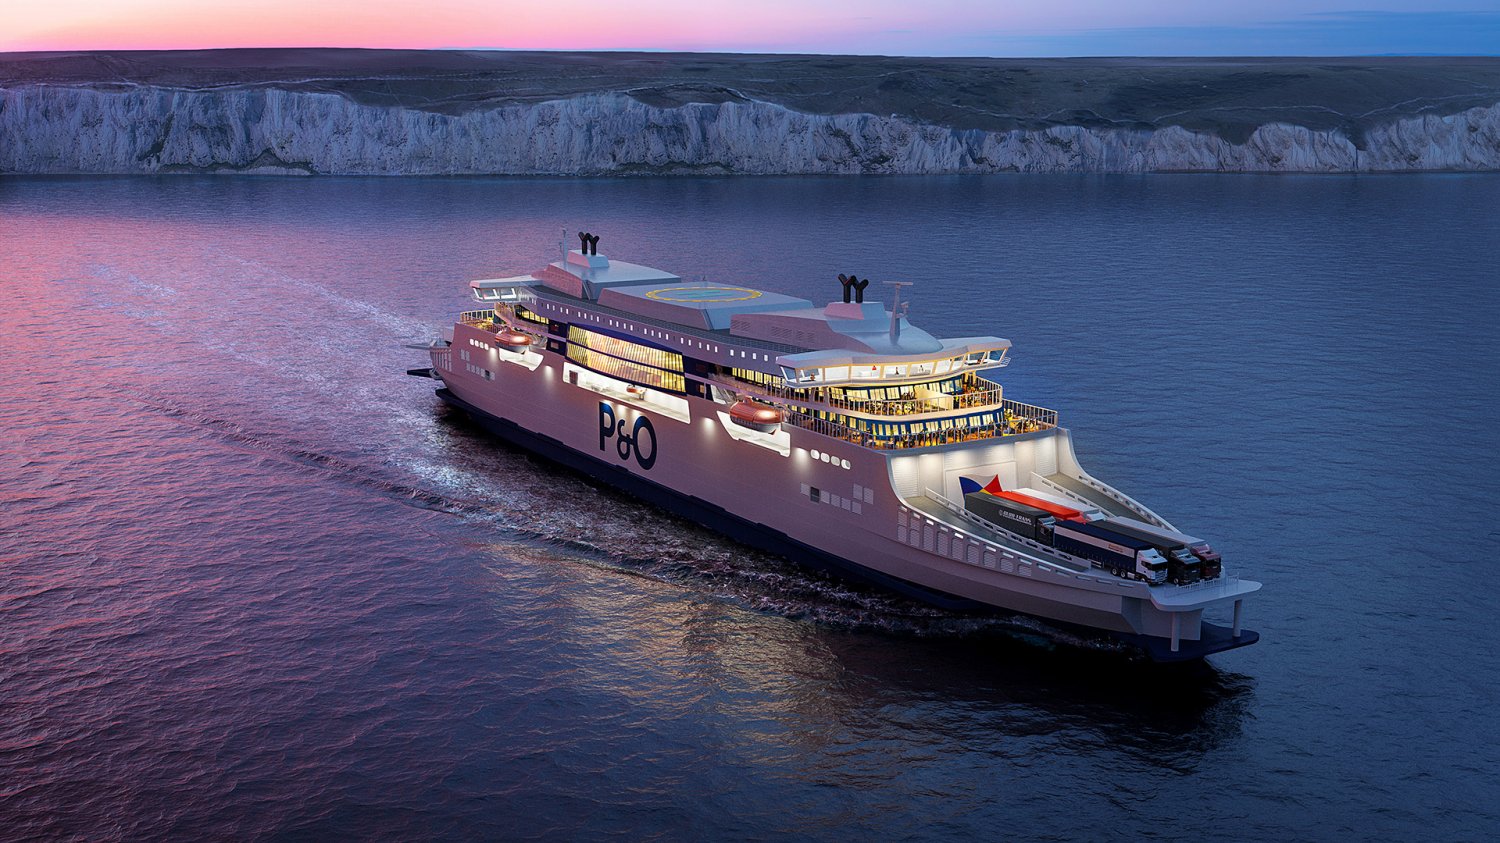 P&O Ferries releases first images of 260m euro new super-ferries, designed to revolutionise transport between Britain and Europe